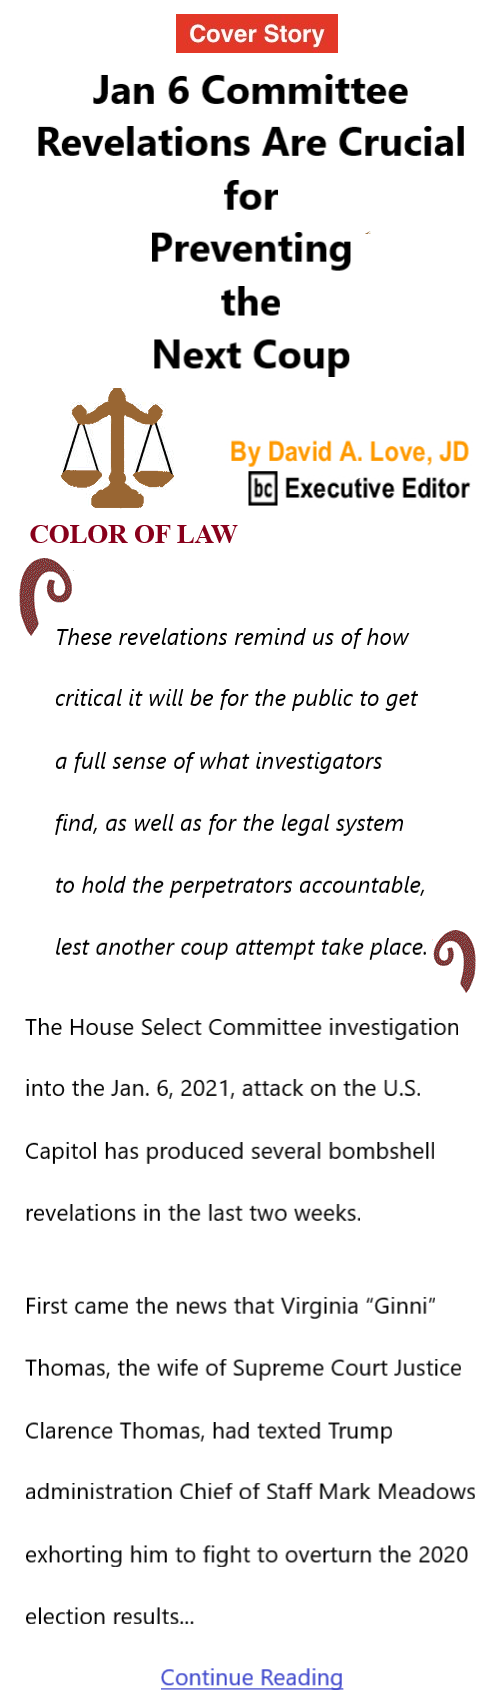 BlackCommentator.com Apr 7, 2022 - Issue 905: Cover Story: Jan 6 Committee Revelations Are Crucial for Preventing the Next Coup - Color of Law By David A. Love, JD, BC Executive Editor